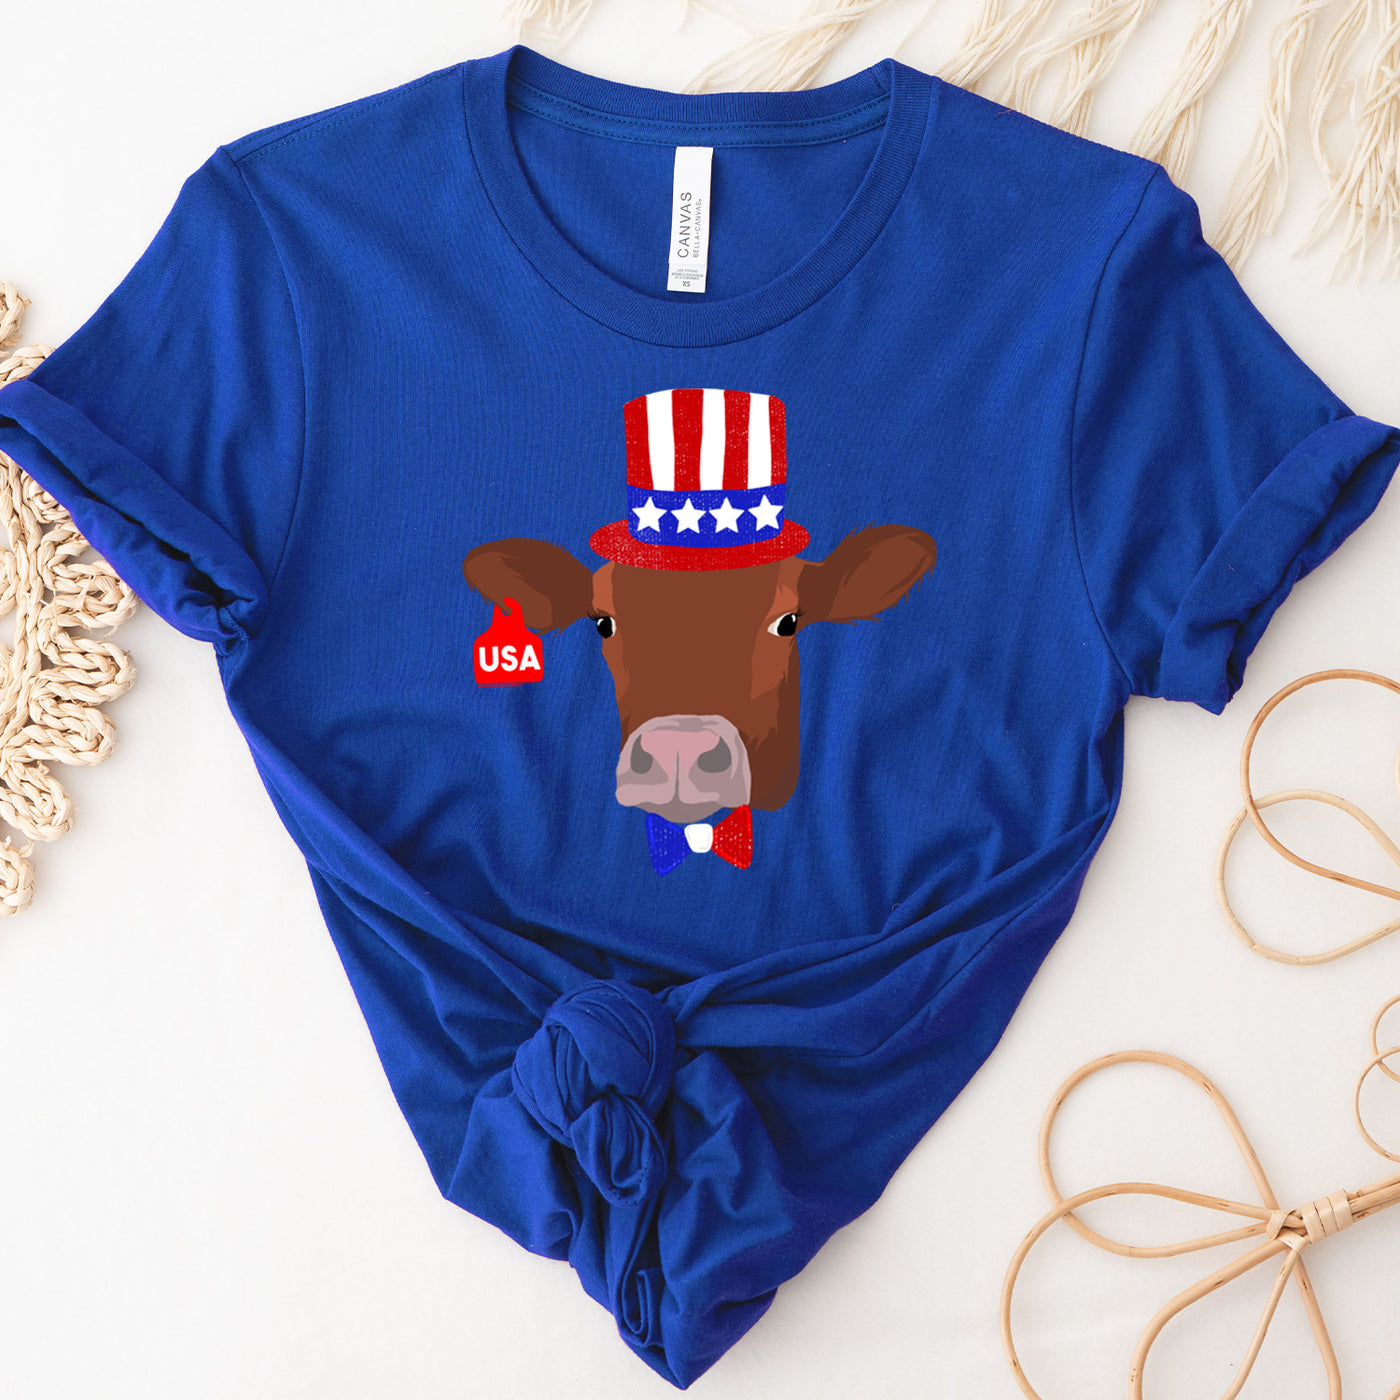 Red, White & Blue Steer T-Shirt (XS-4XL) - Multiple Colors!